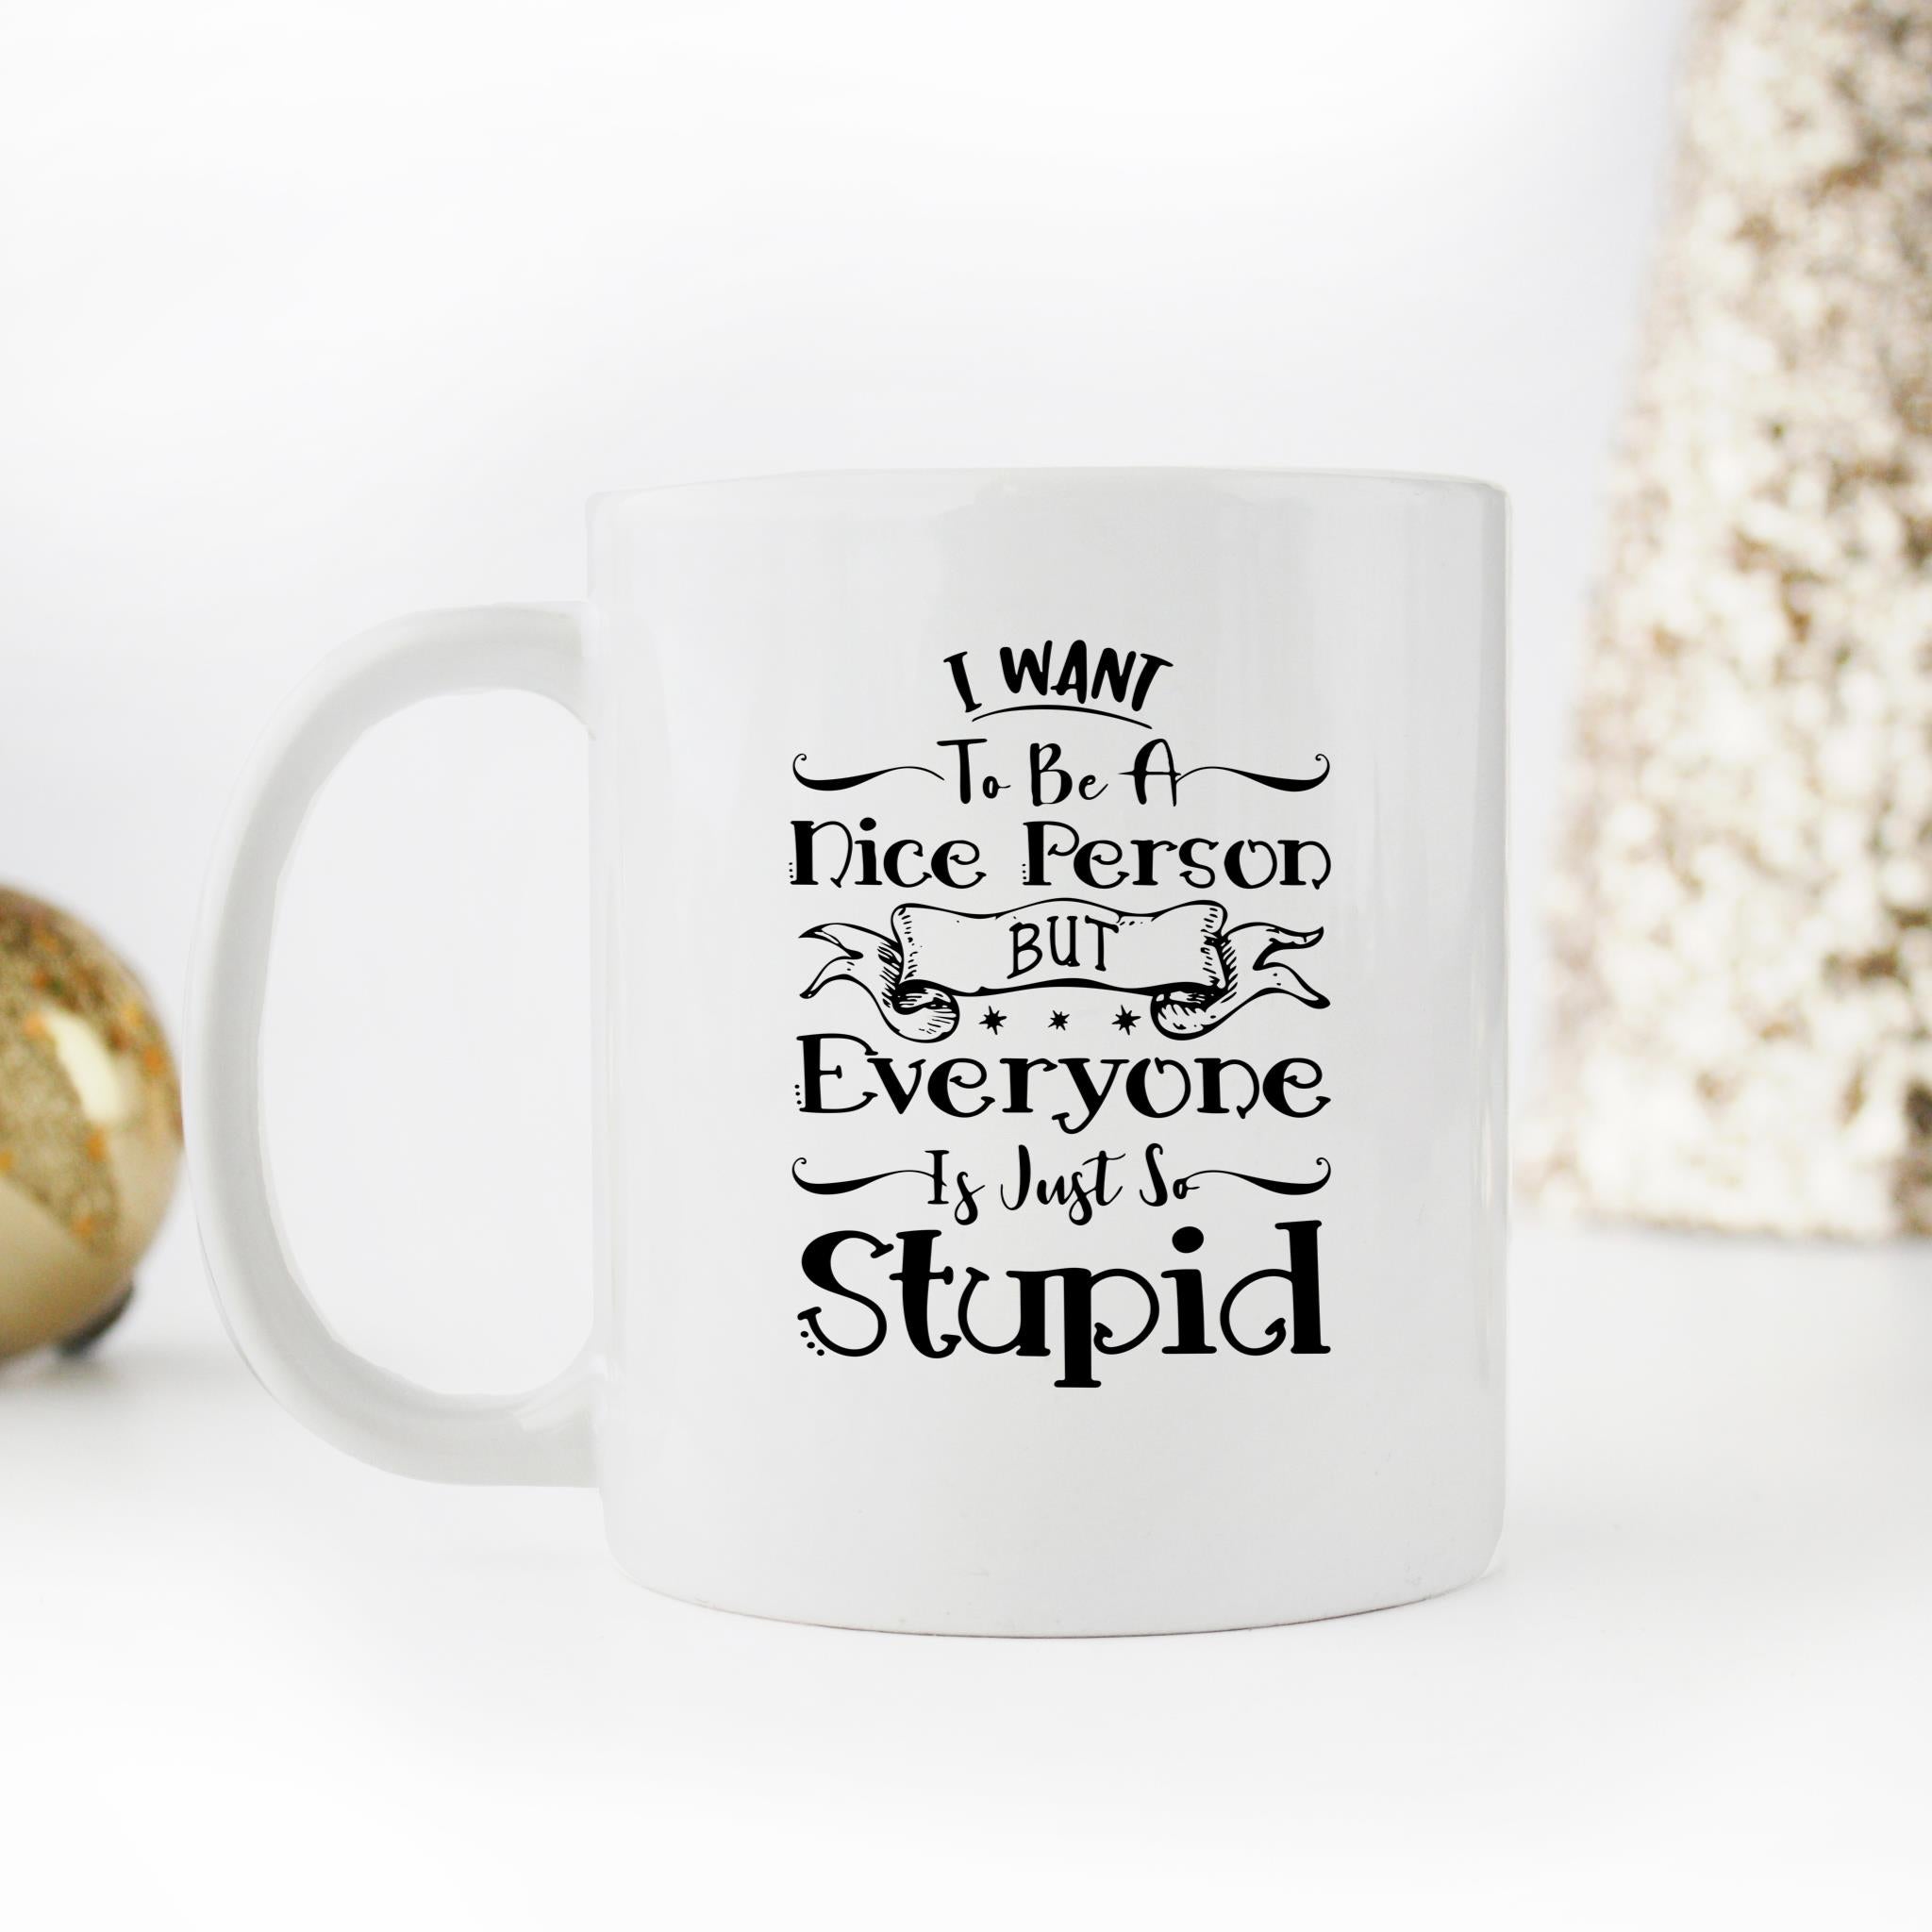 Skitongifts Funny Ceramic Novelty Coffee Mug I Want To Be A Nice Person But Everyone Is Just So Stupid n7yAwrt